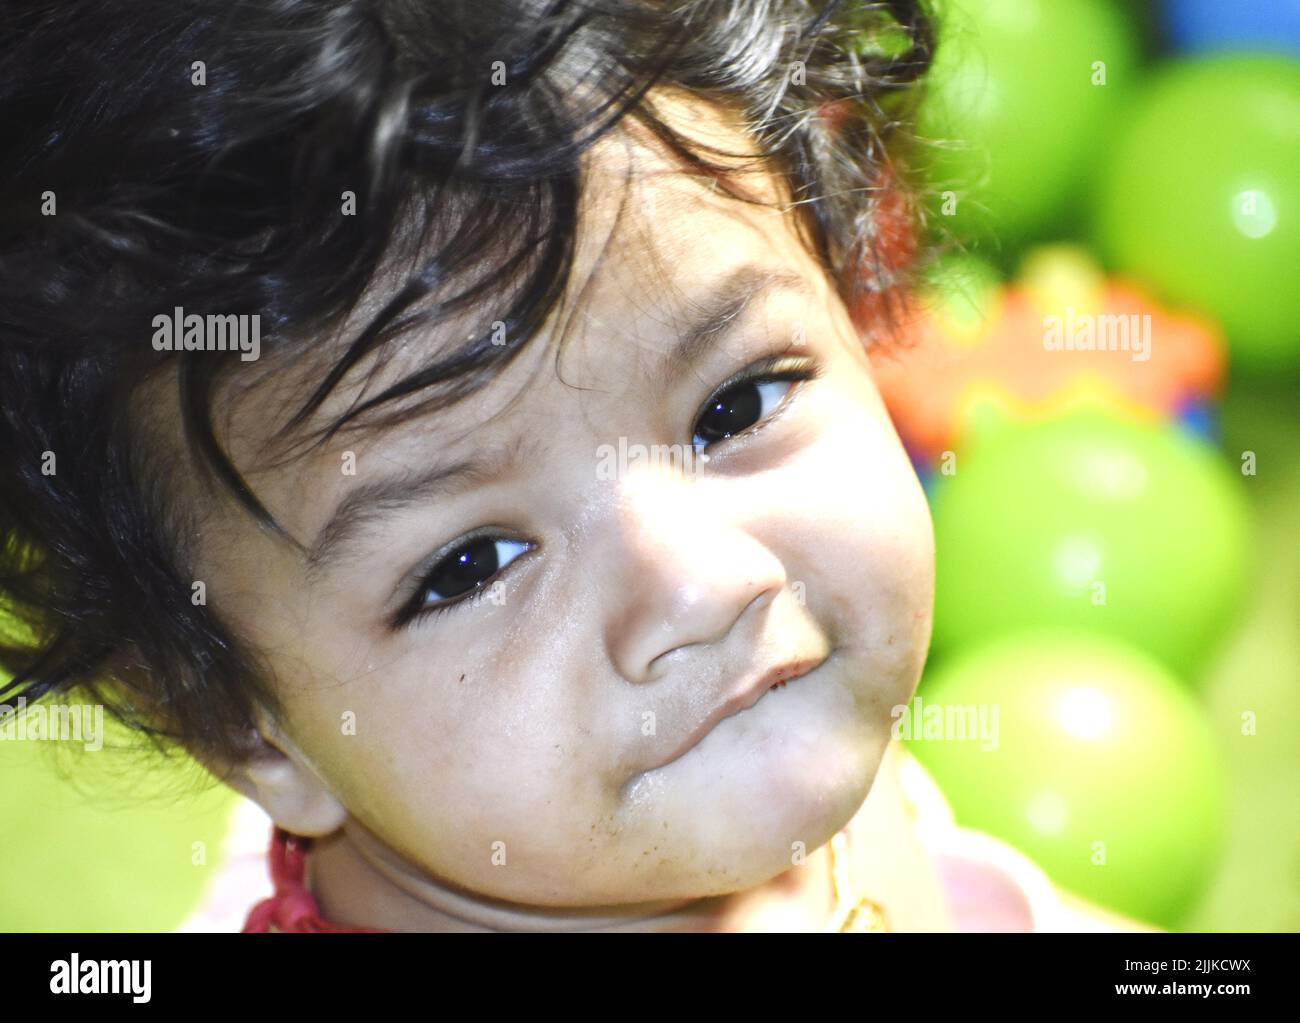 A portrait of a cute Indian baby with big eyes sitting on the playground Stock Photo